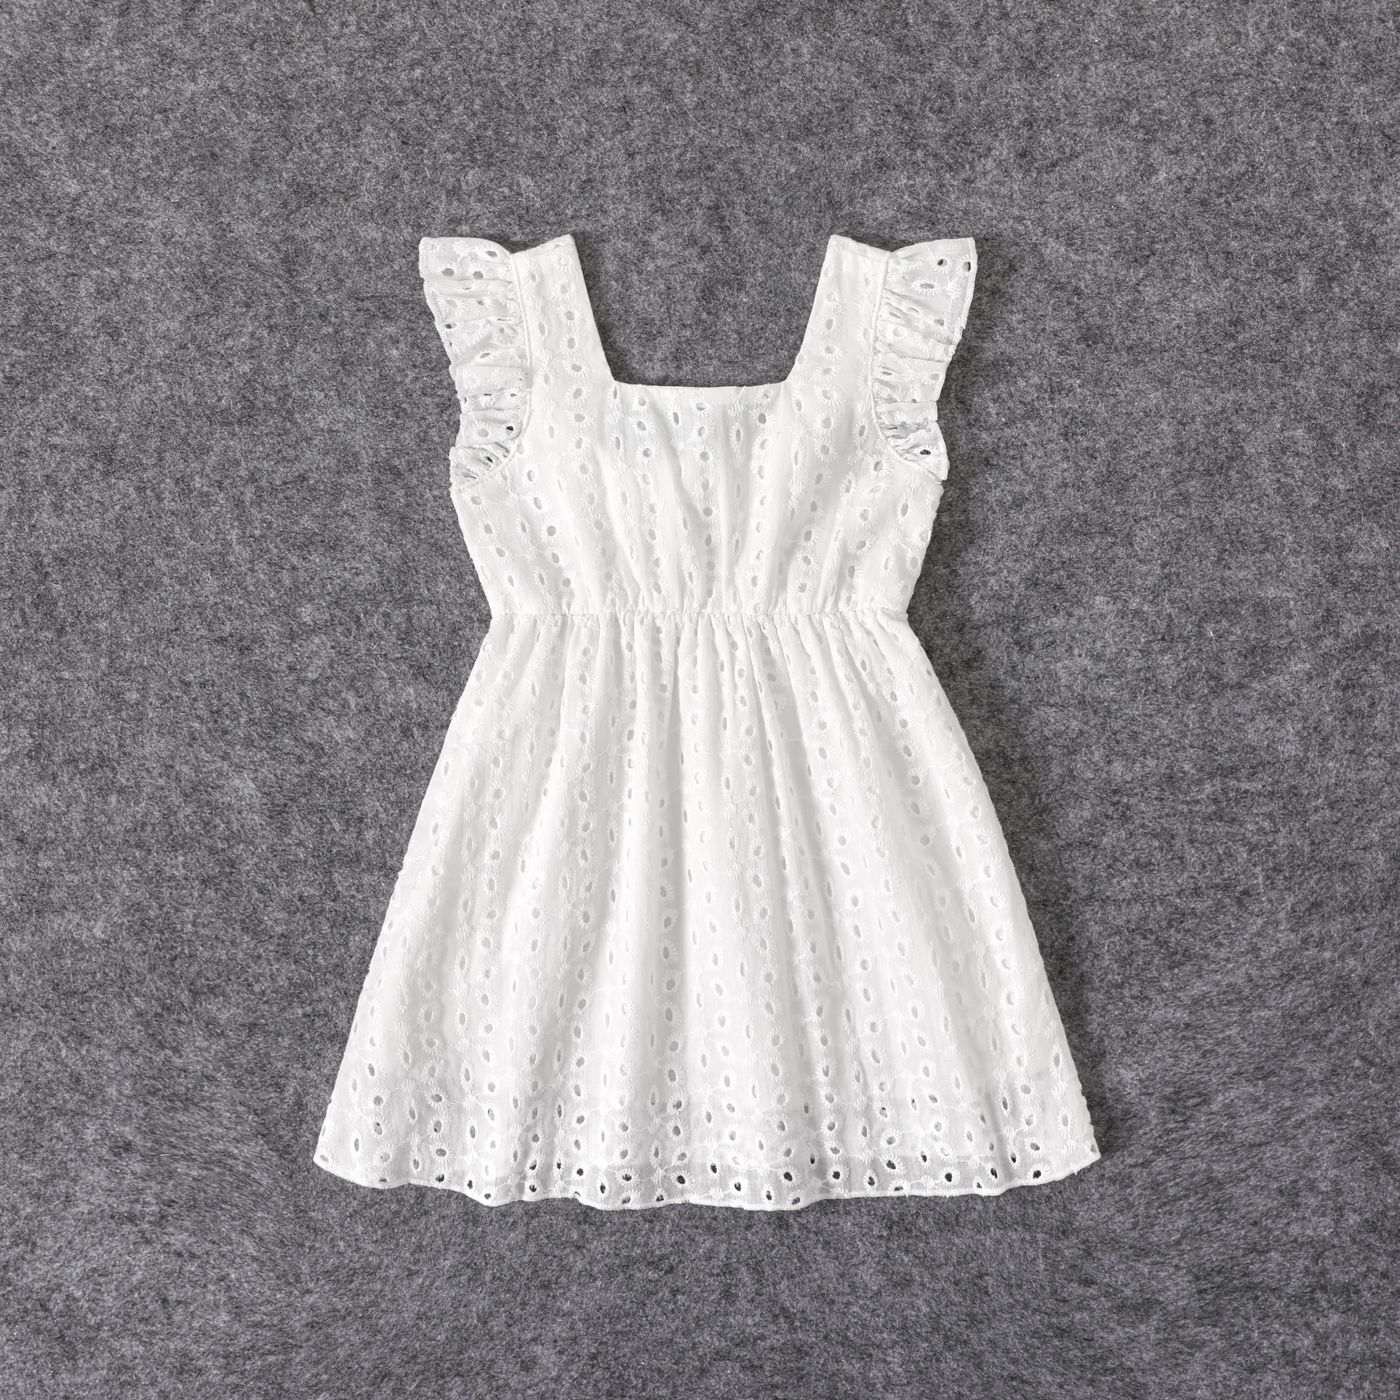 Mommy And Me 100% Cotton White Eyelet Embroidered Ruffle Trim Sleeveless Dresses